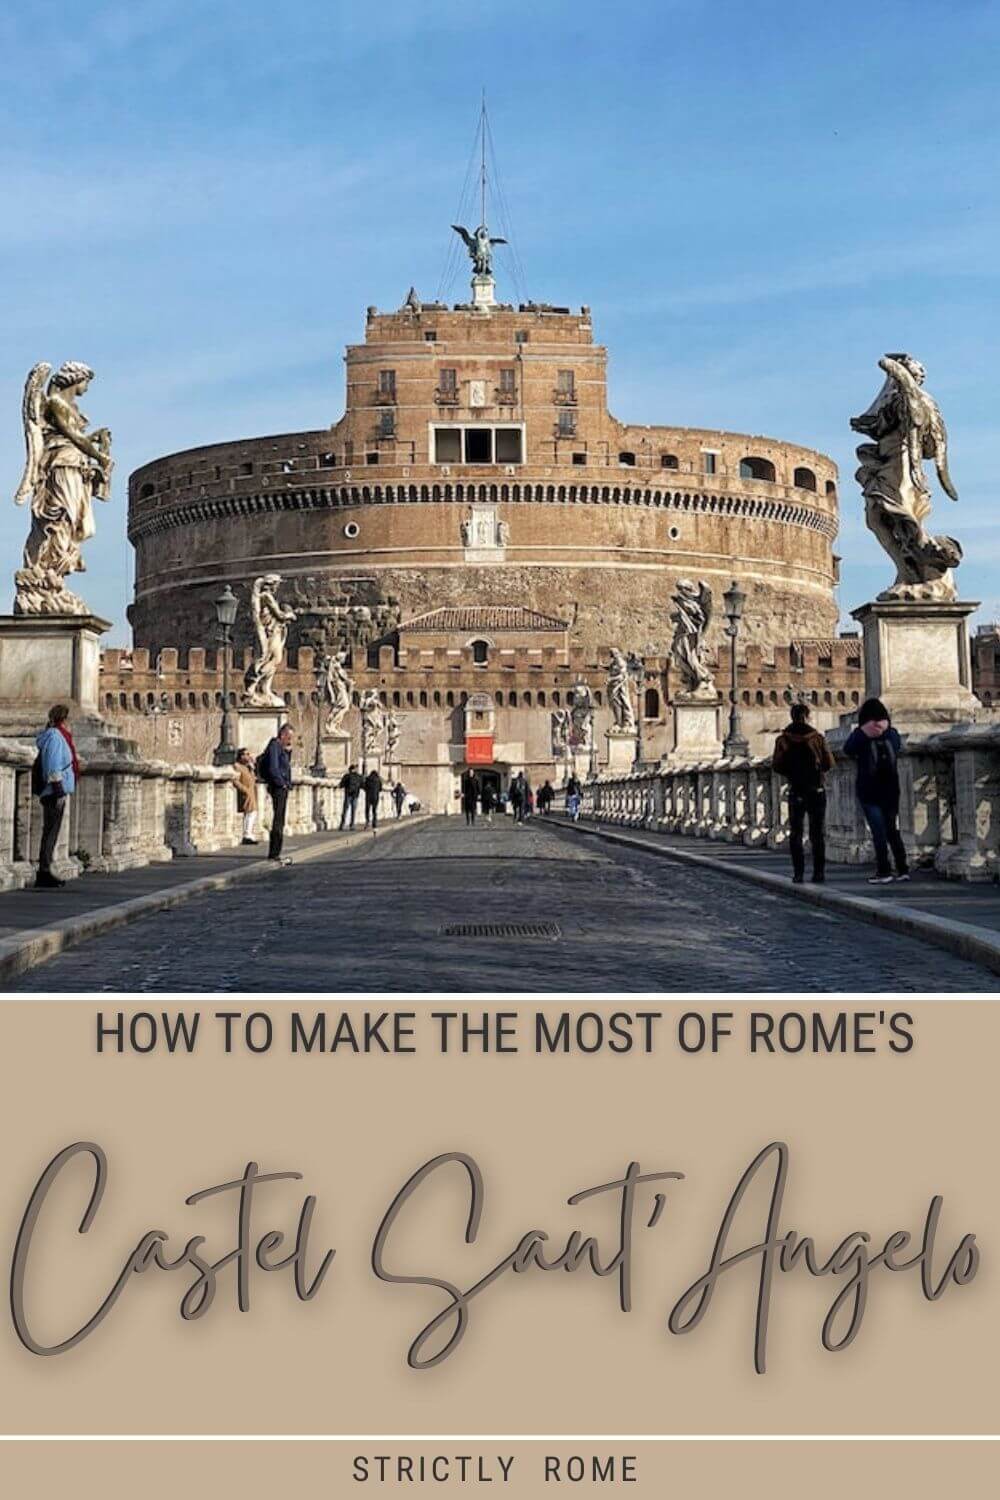 Discover how to make the most of Castel Sant'Angelo, Rome - via @strictlyrome